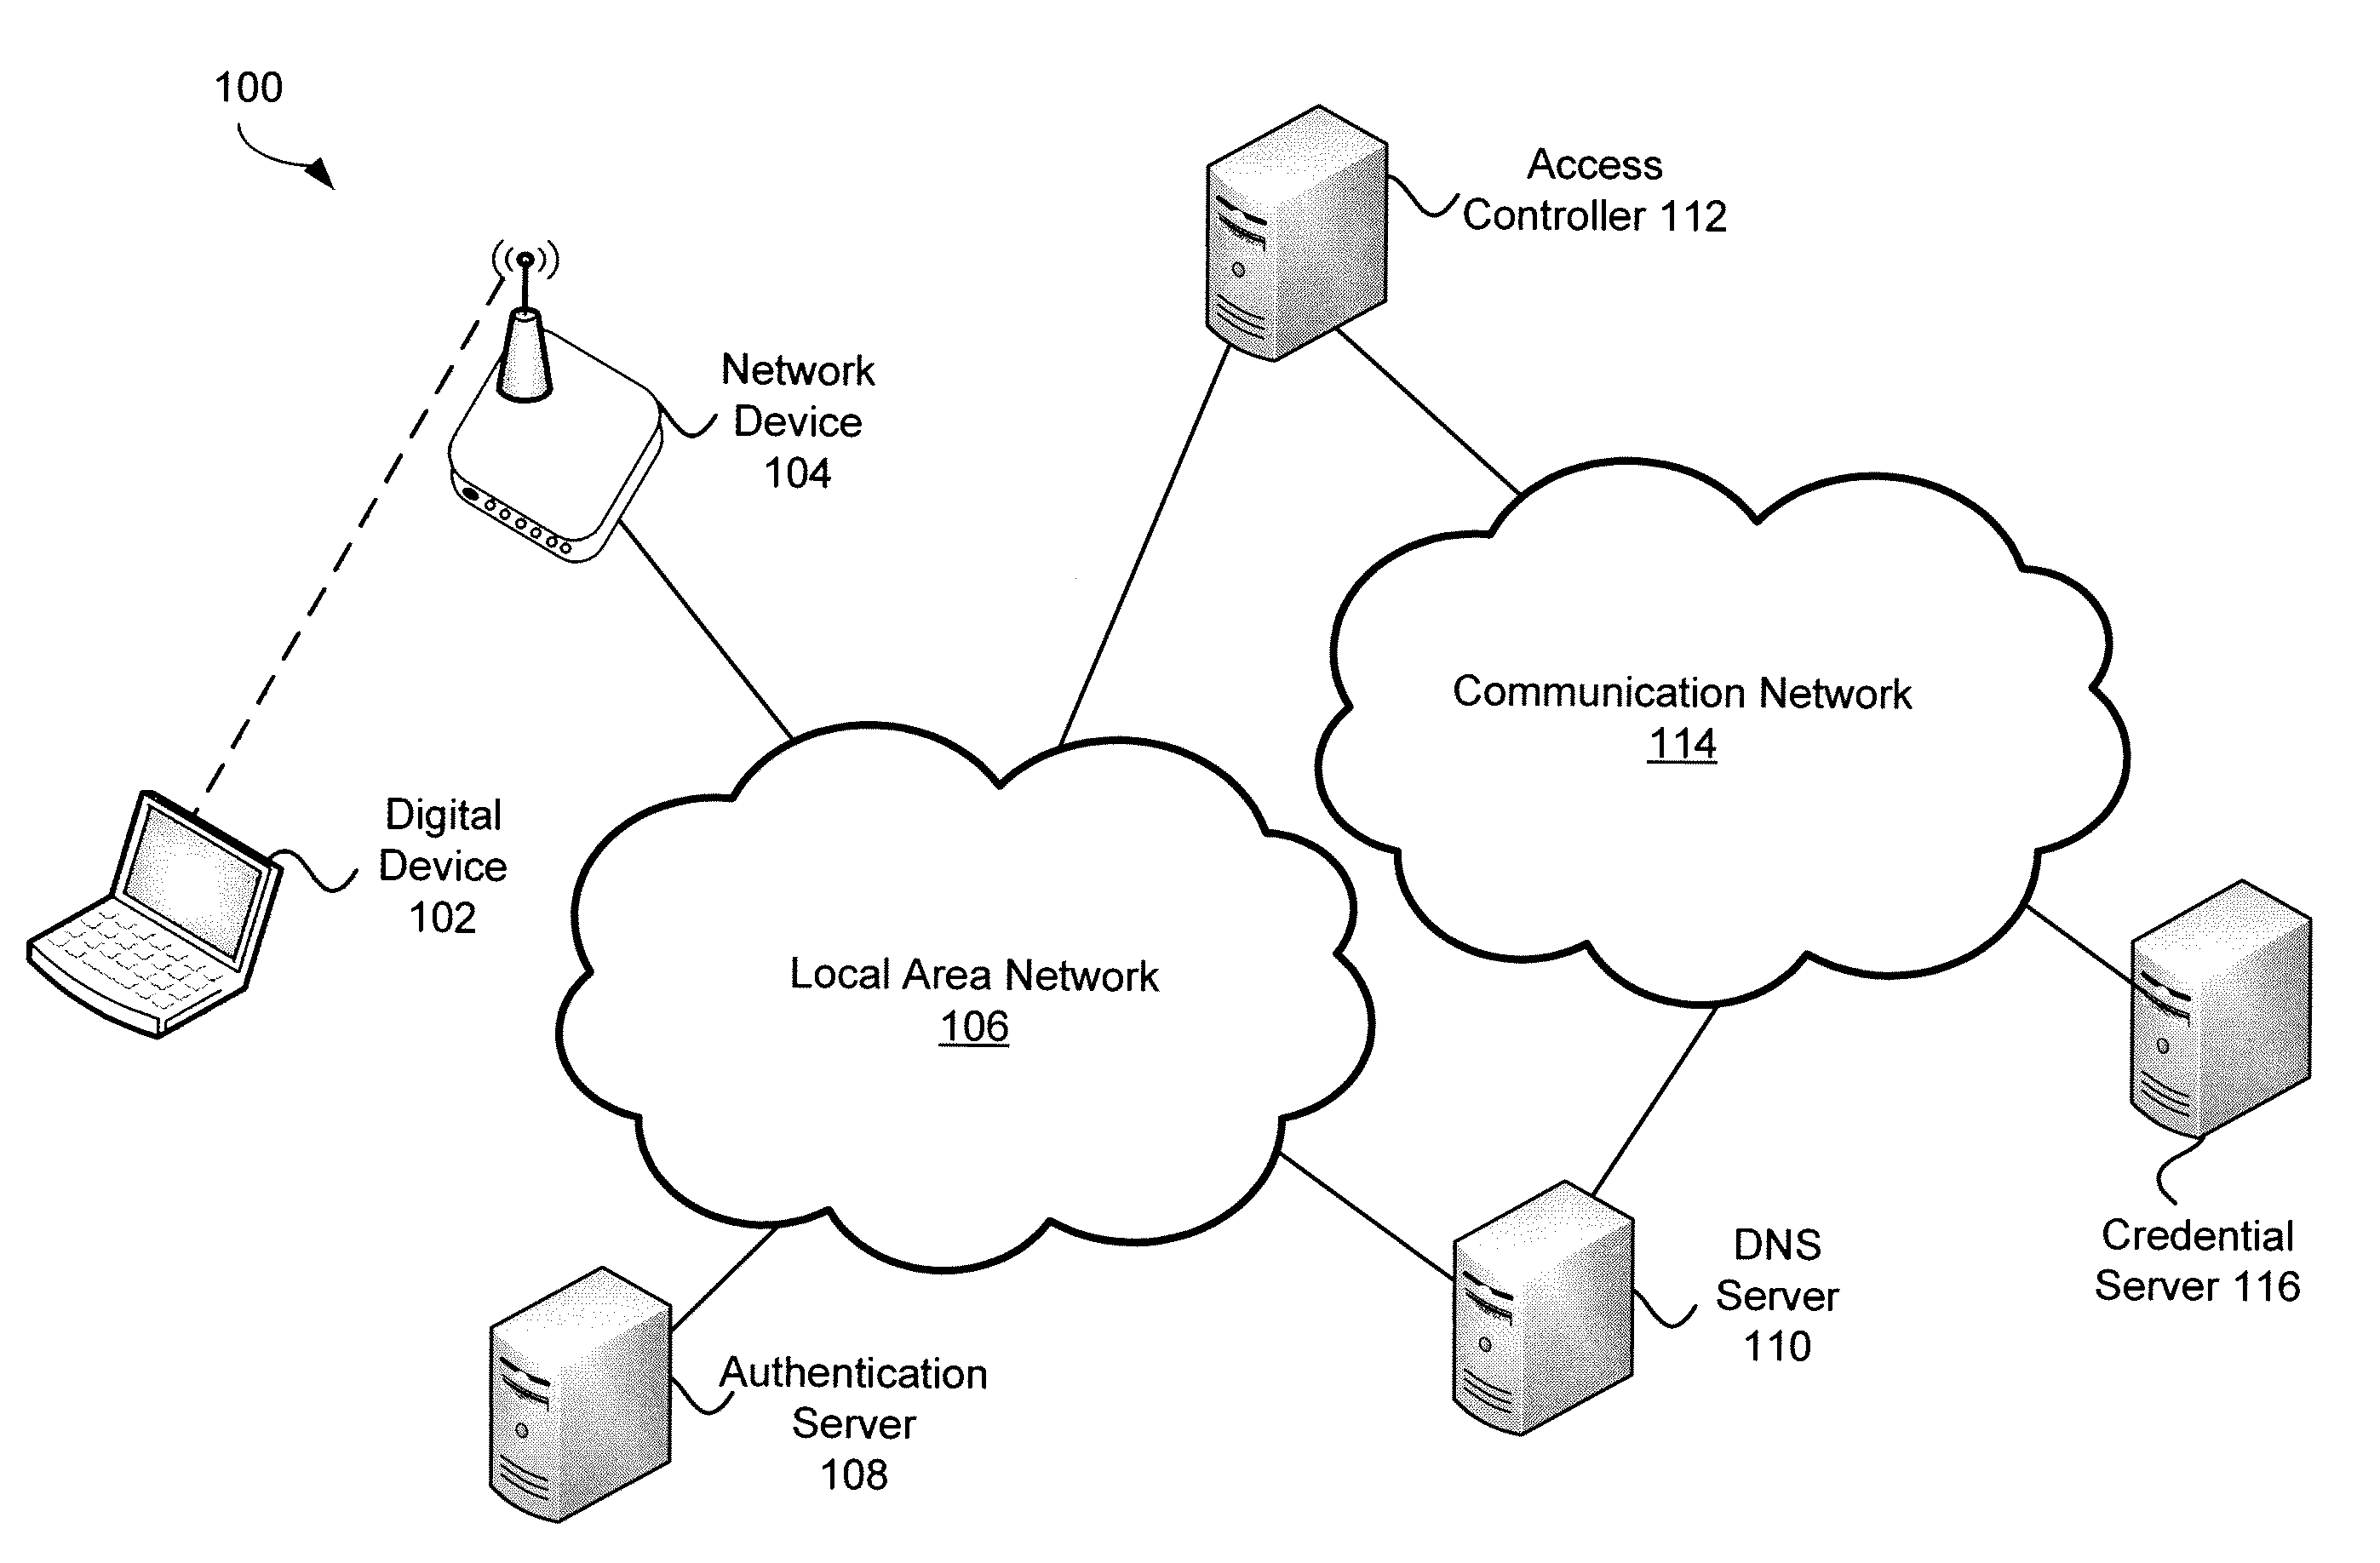 Systems and methods for wireless network selection based on attributes stored in a network database